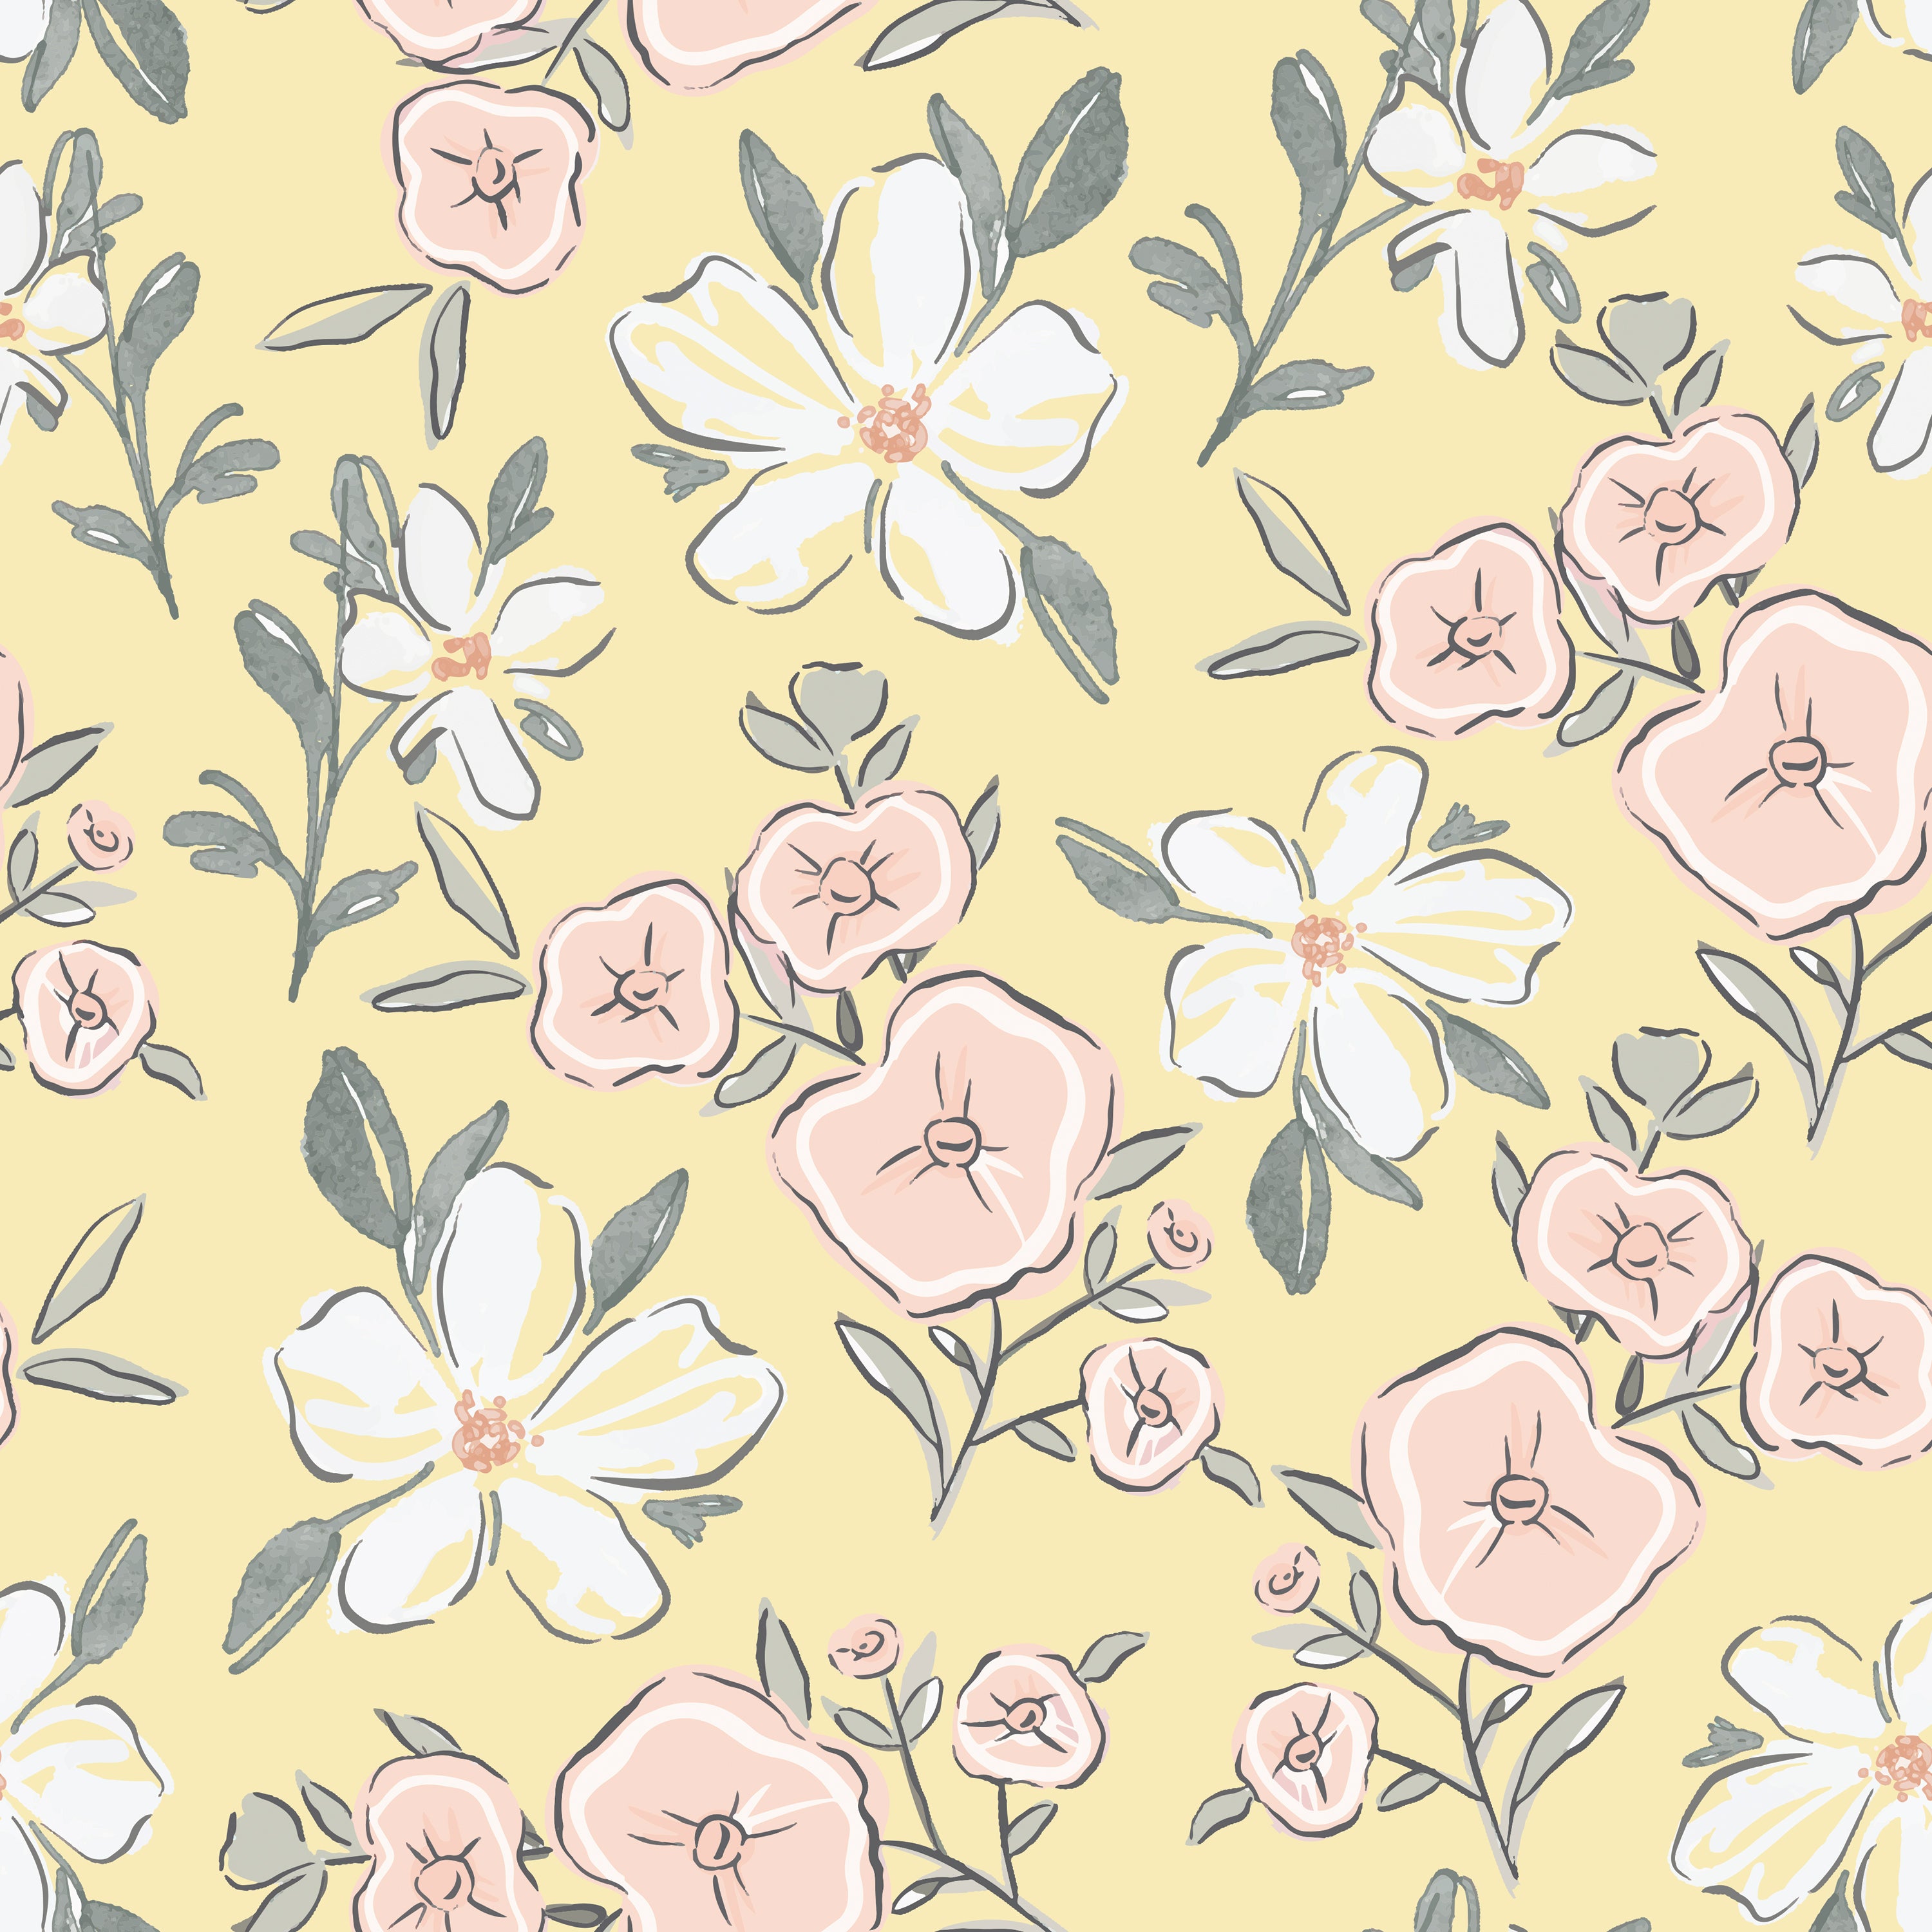 A bright and joyful floral pattern featuring pink and white blossoms with green foliage on a sunny yellow background, perfect for infusing a nursery or play area with warmth and cheer.